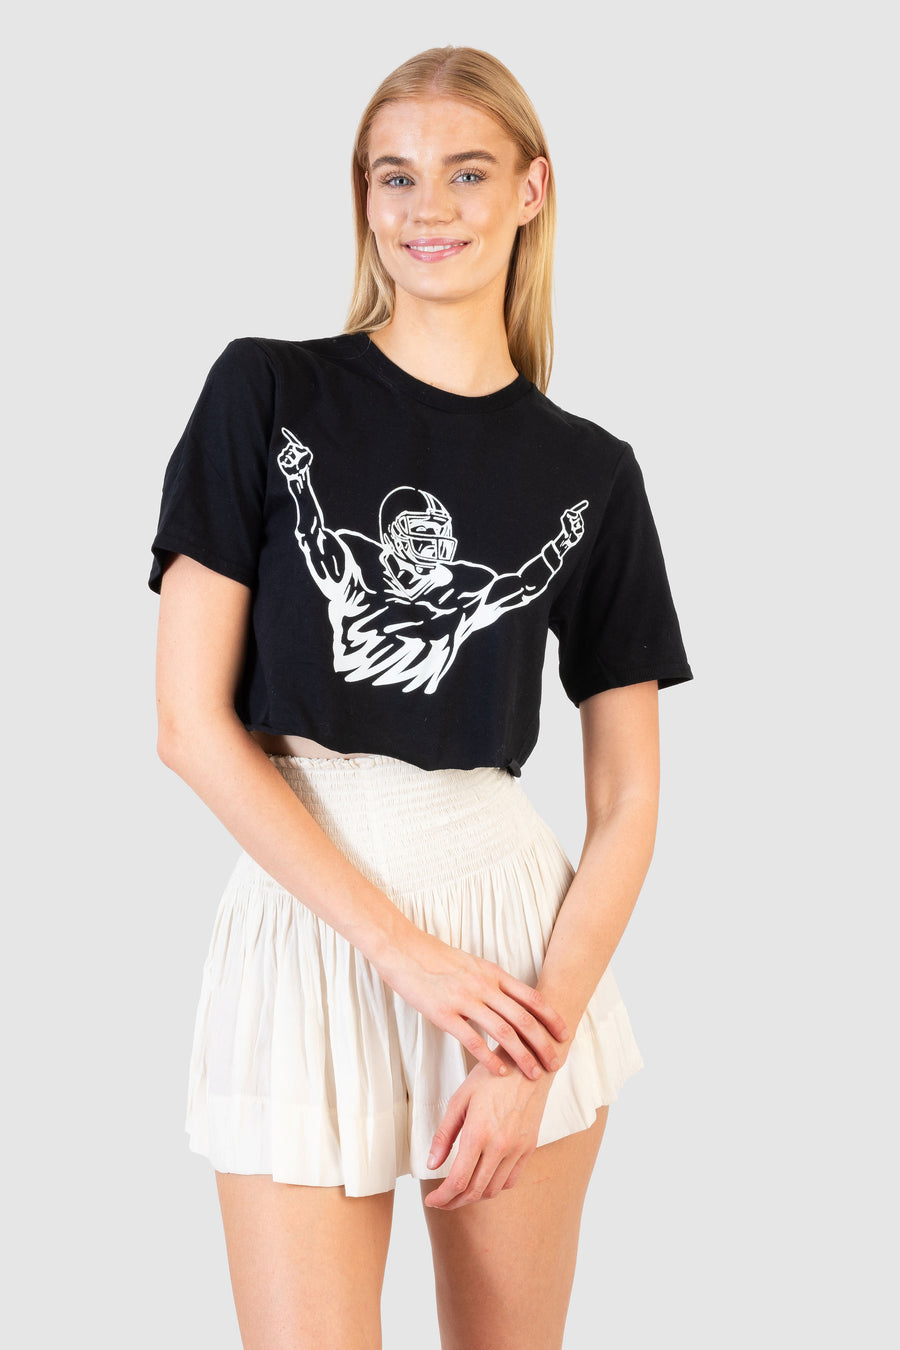 Cropped Tee Football Player *Limited*Edition*